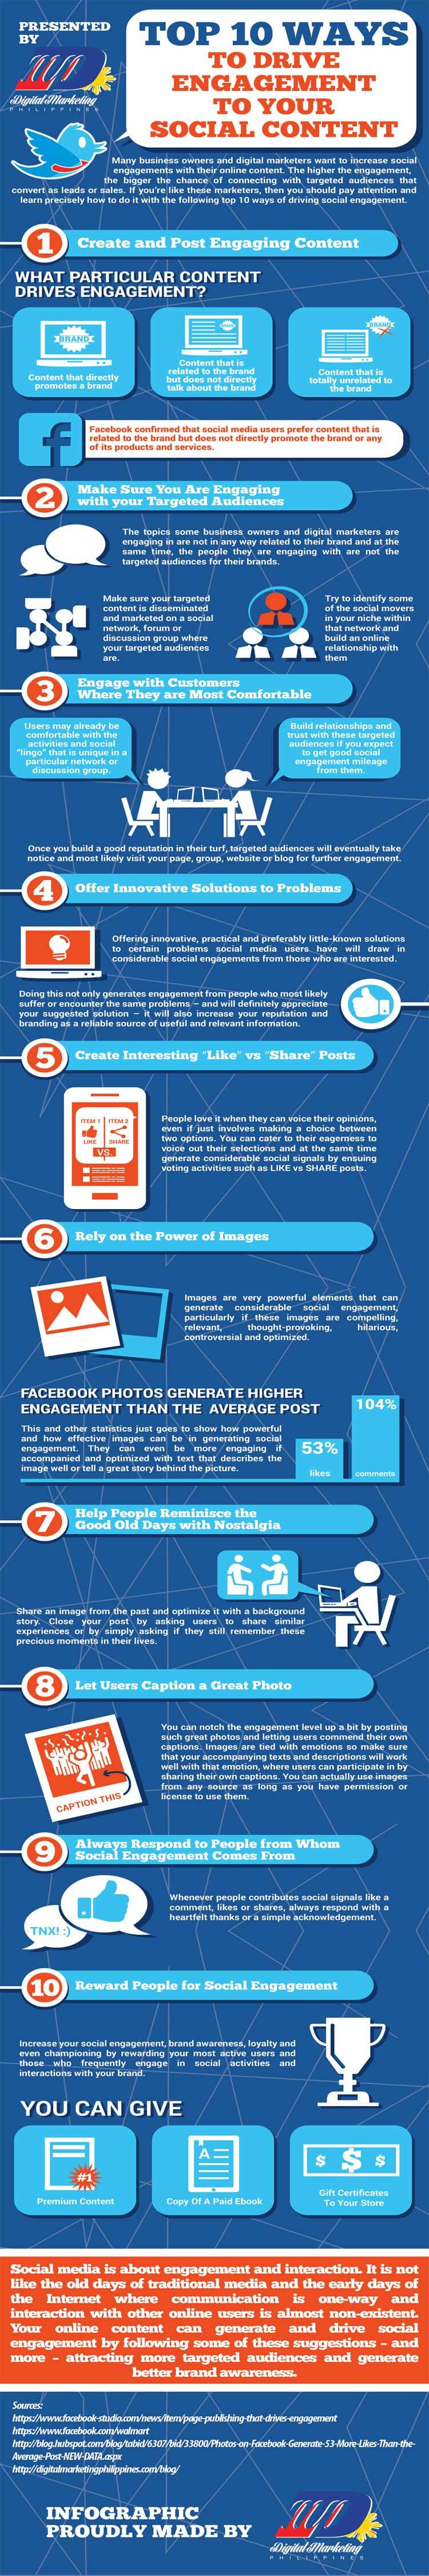 Top-10-Ways-to-Drive-Engagement-to-Your-Social-Content